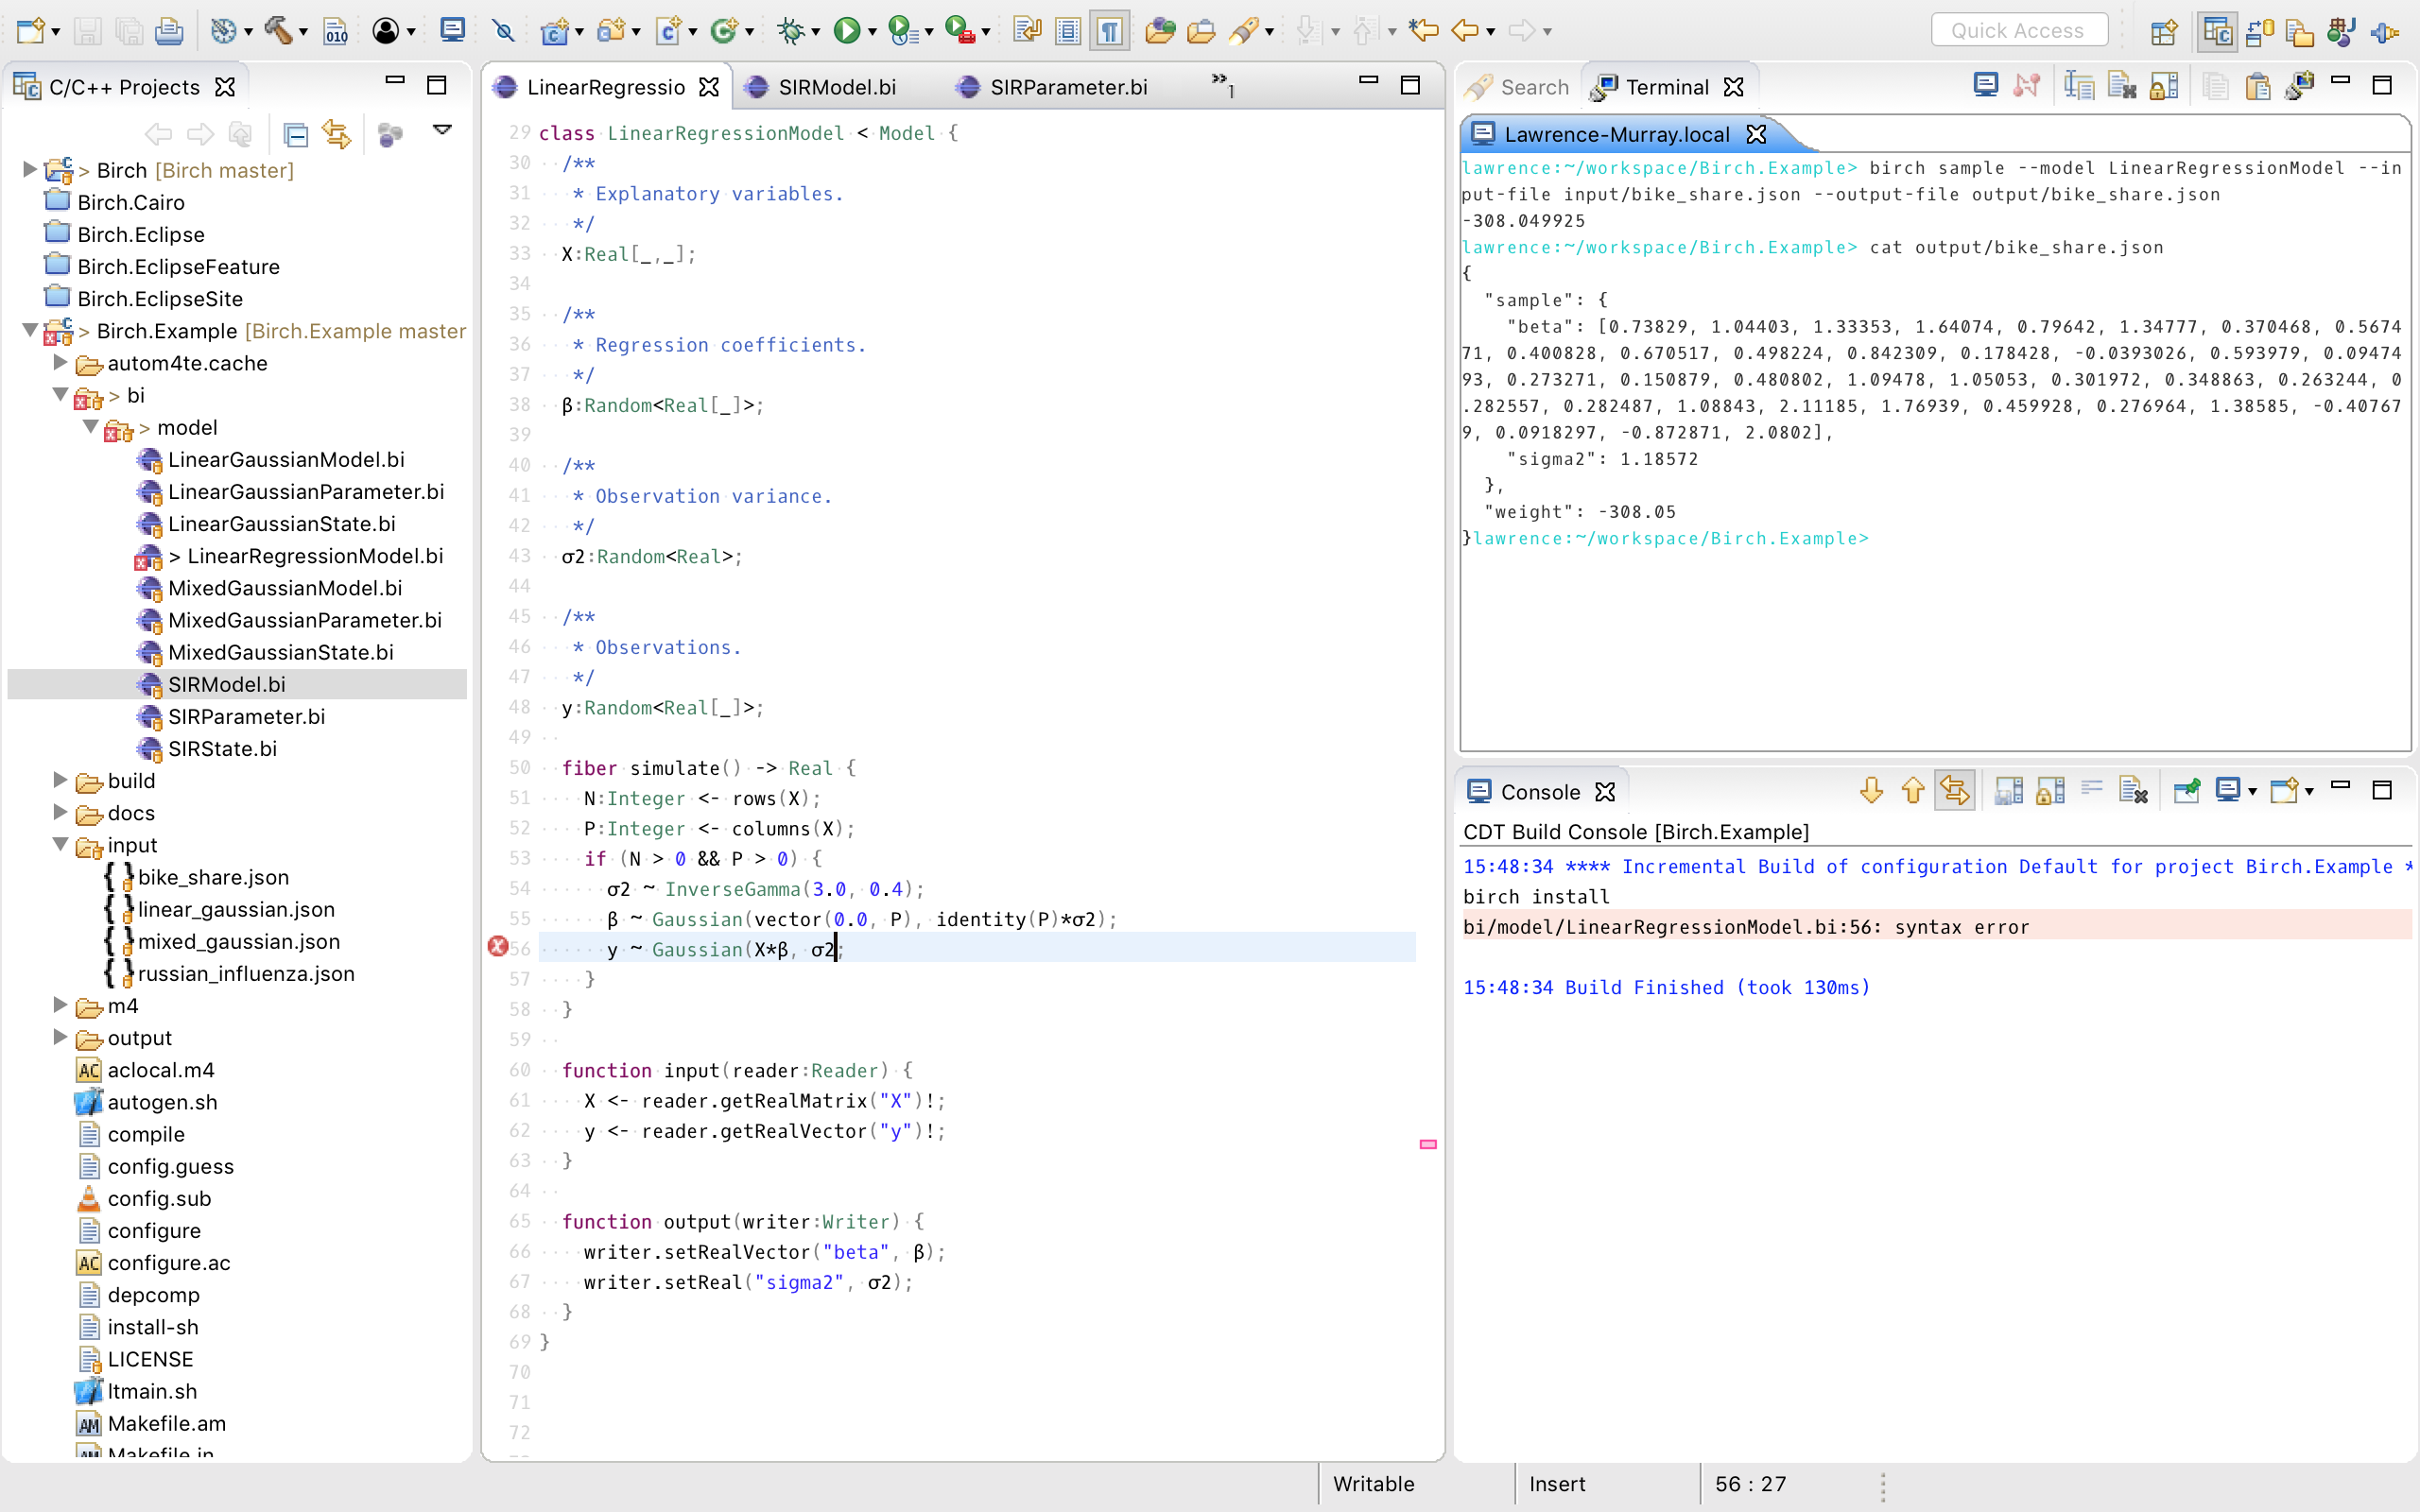 eclipse ide for mac os x